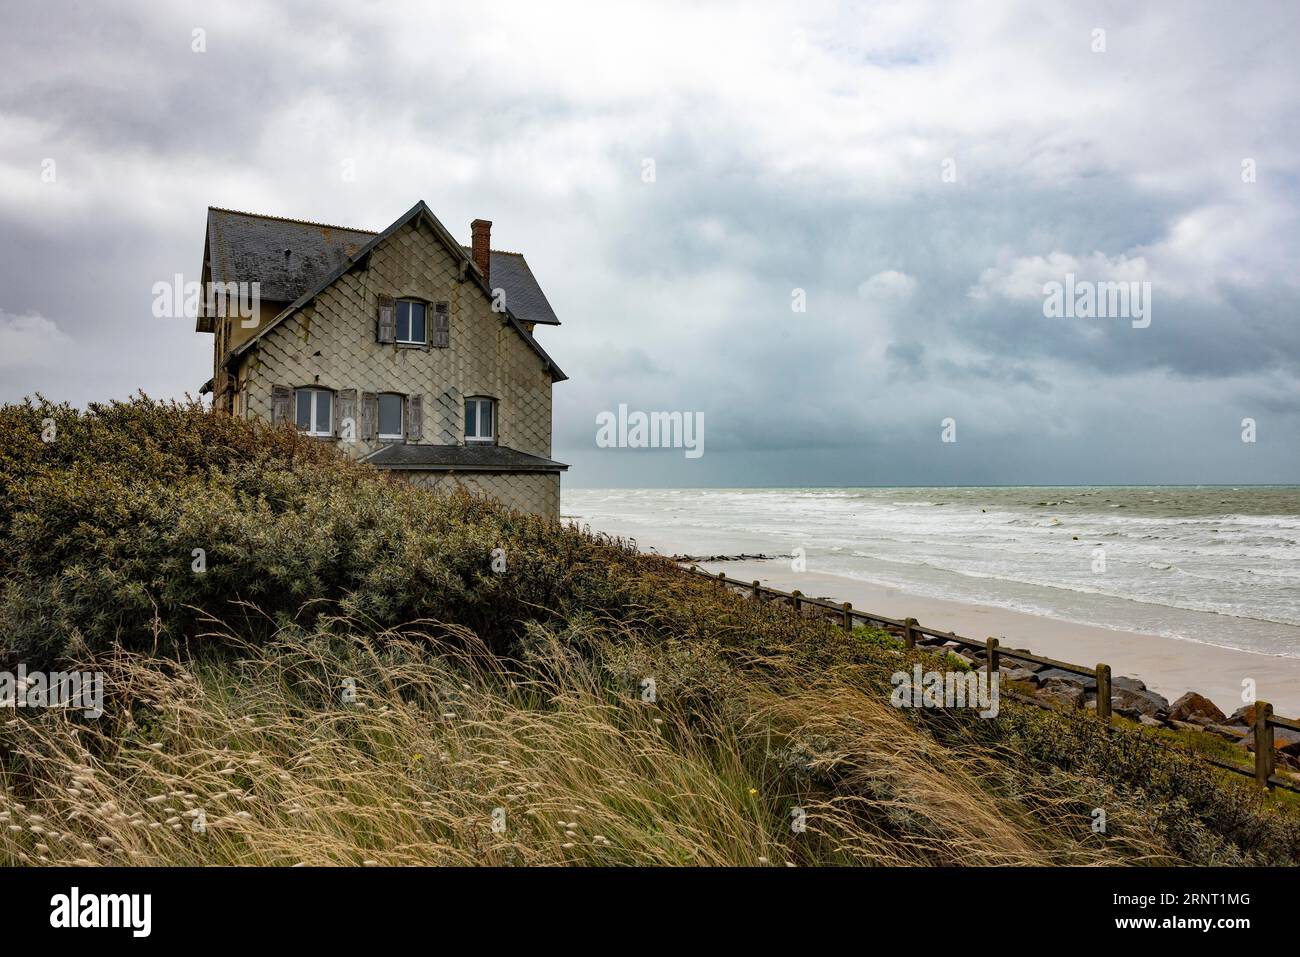 Lonely house by the sea in stormy weather, Portbail, Cotentin, Manche, Normandy, France Stock Photo